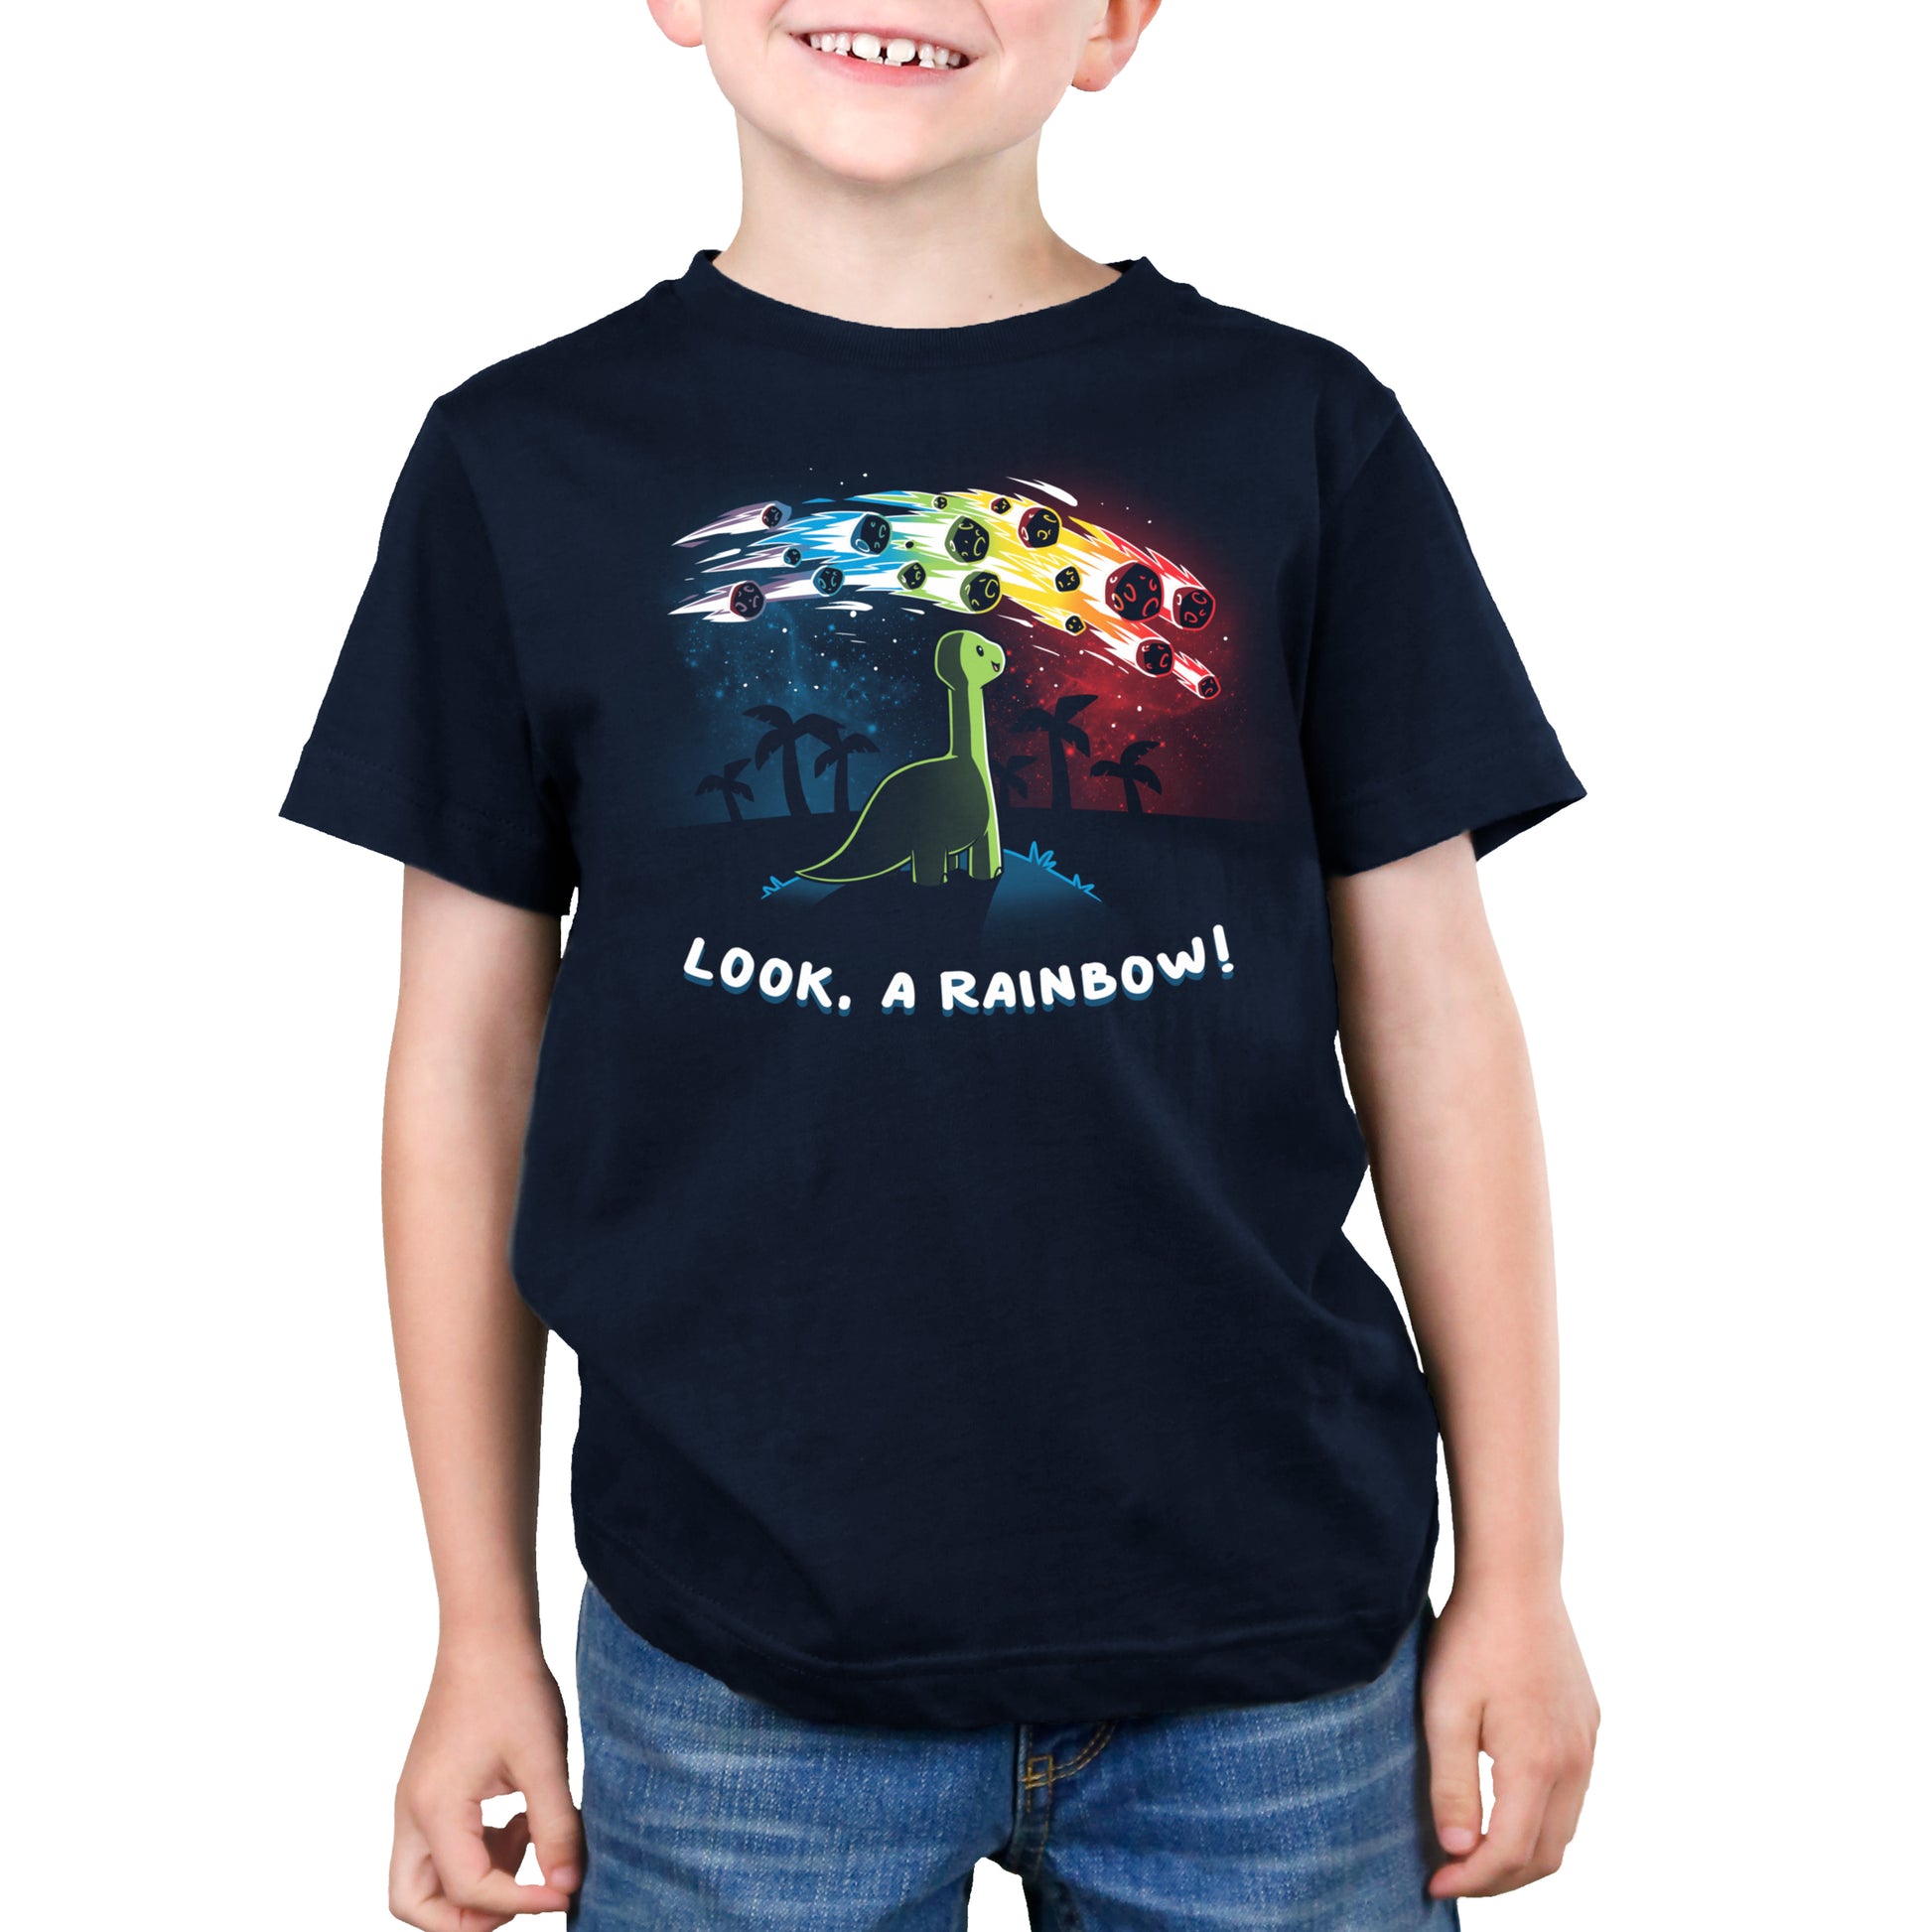 A young boy wearing a navy blue t-shirt with TeeTurtle's Look, a Rainbow! design.